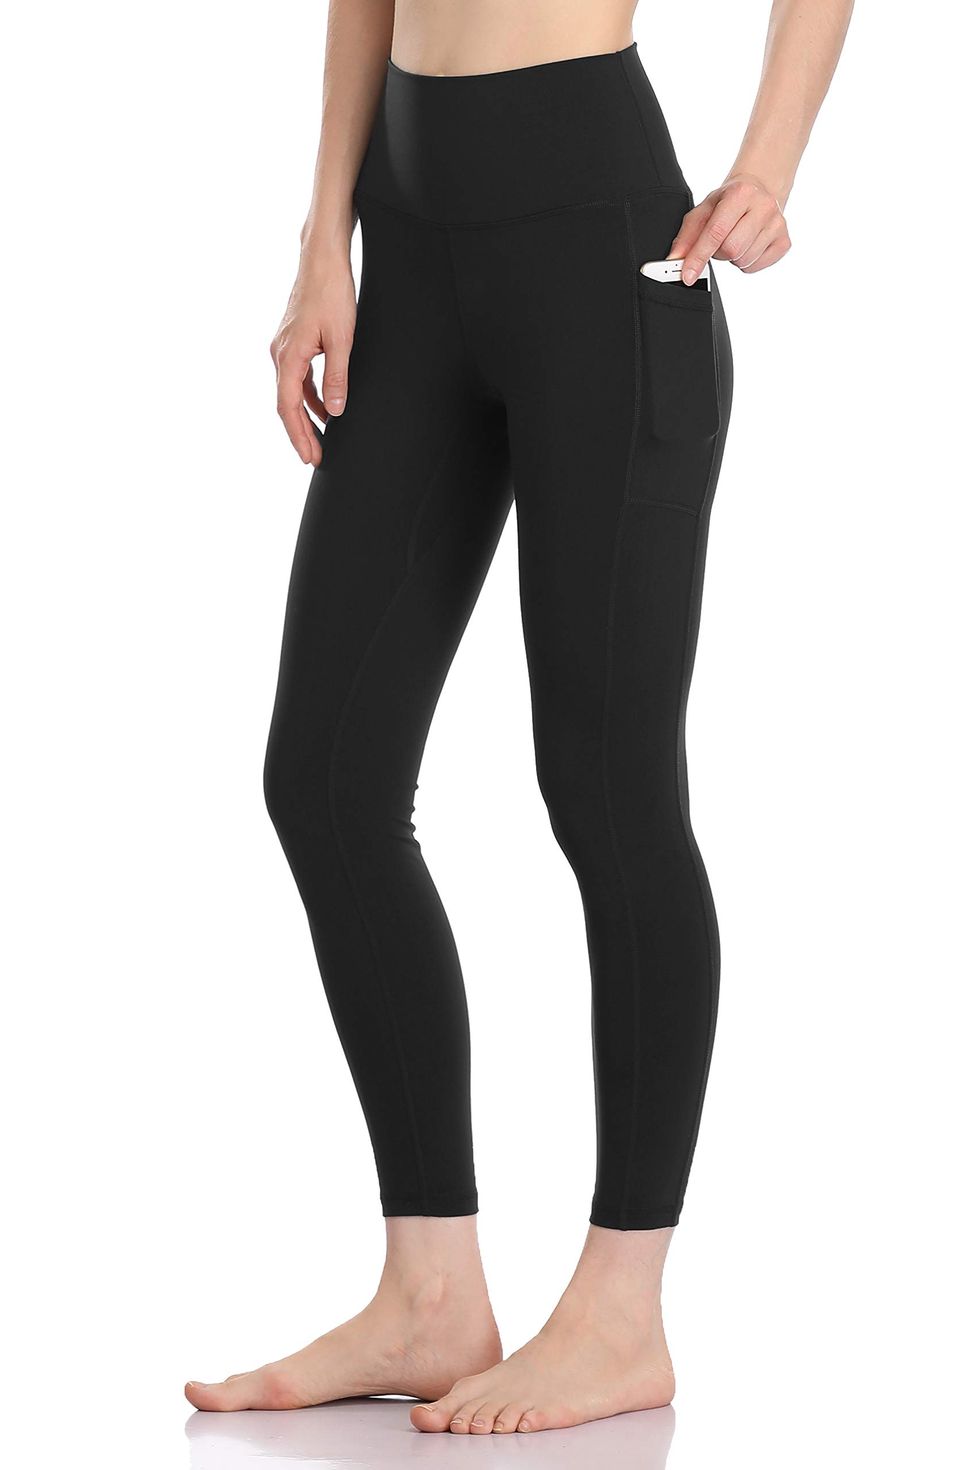 14 Best Plus-Sized Yoga Pants You'll Never Want to Take Off